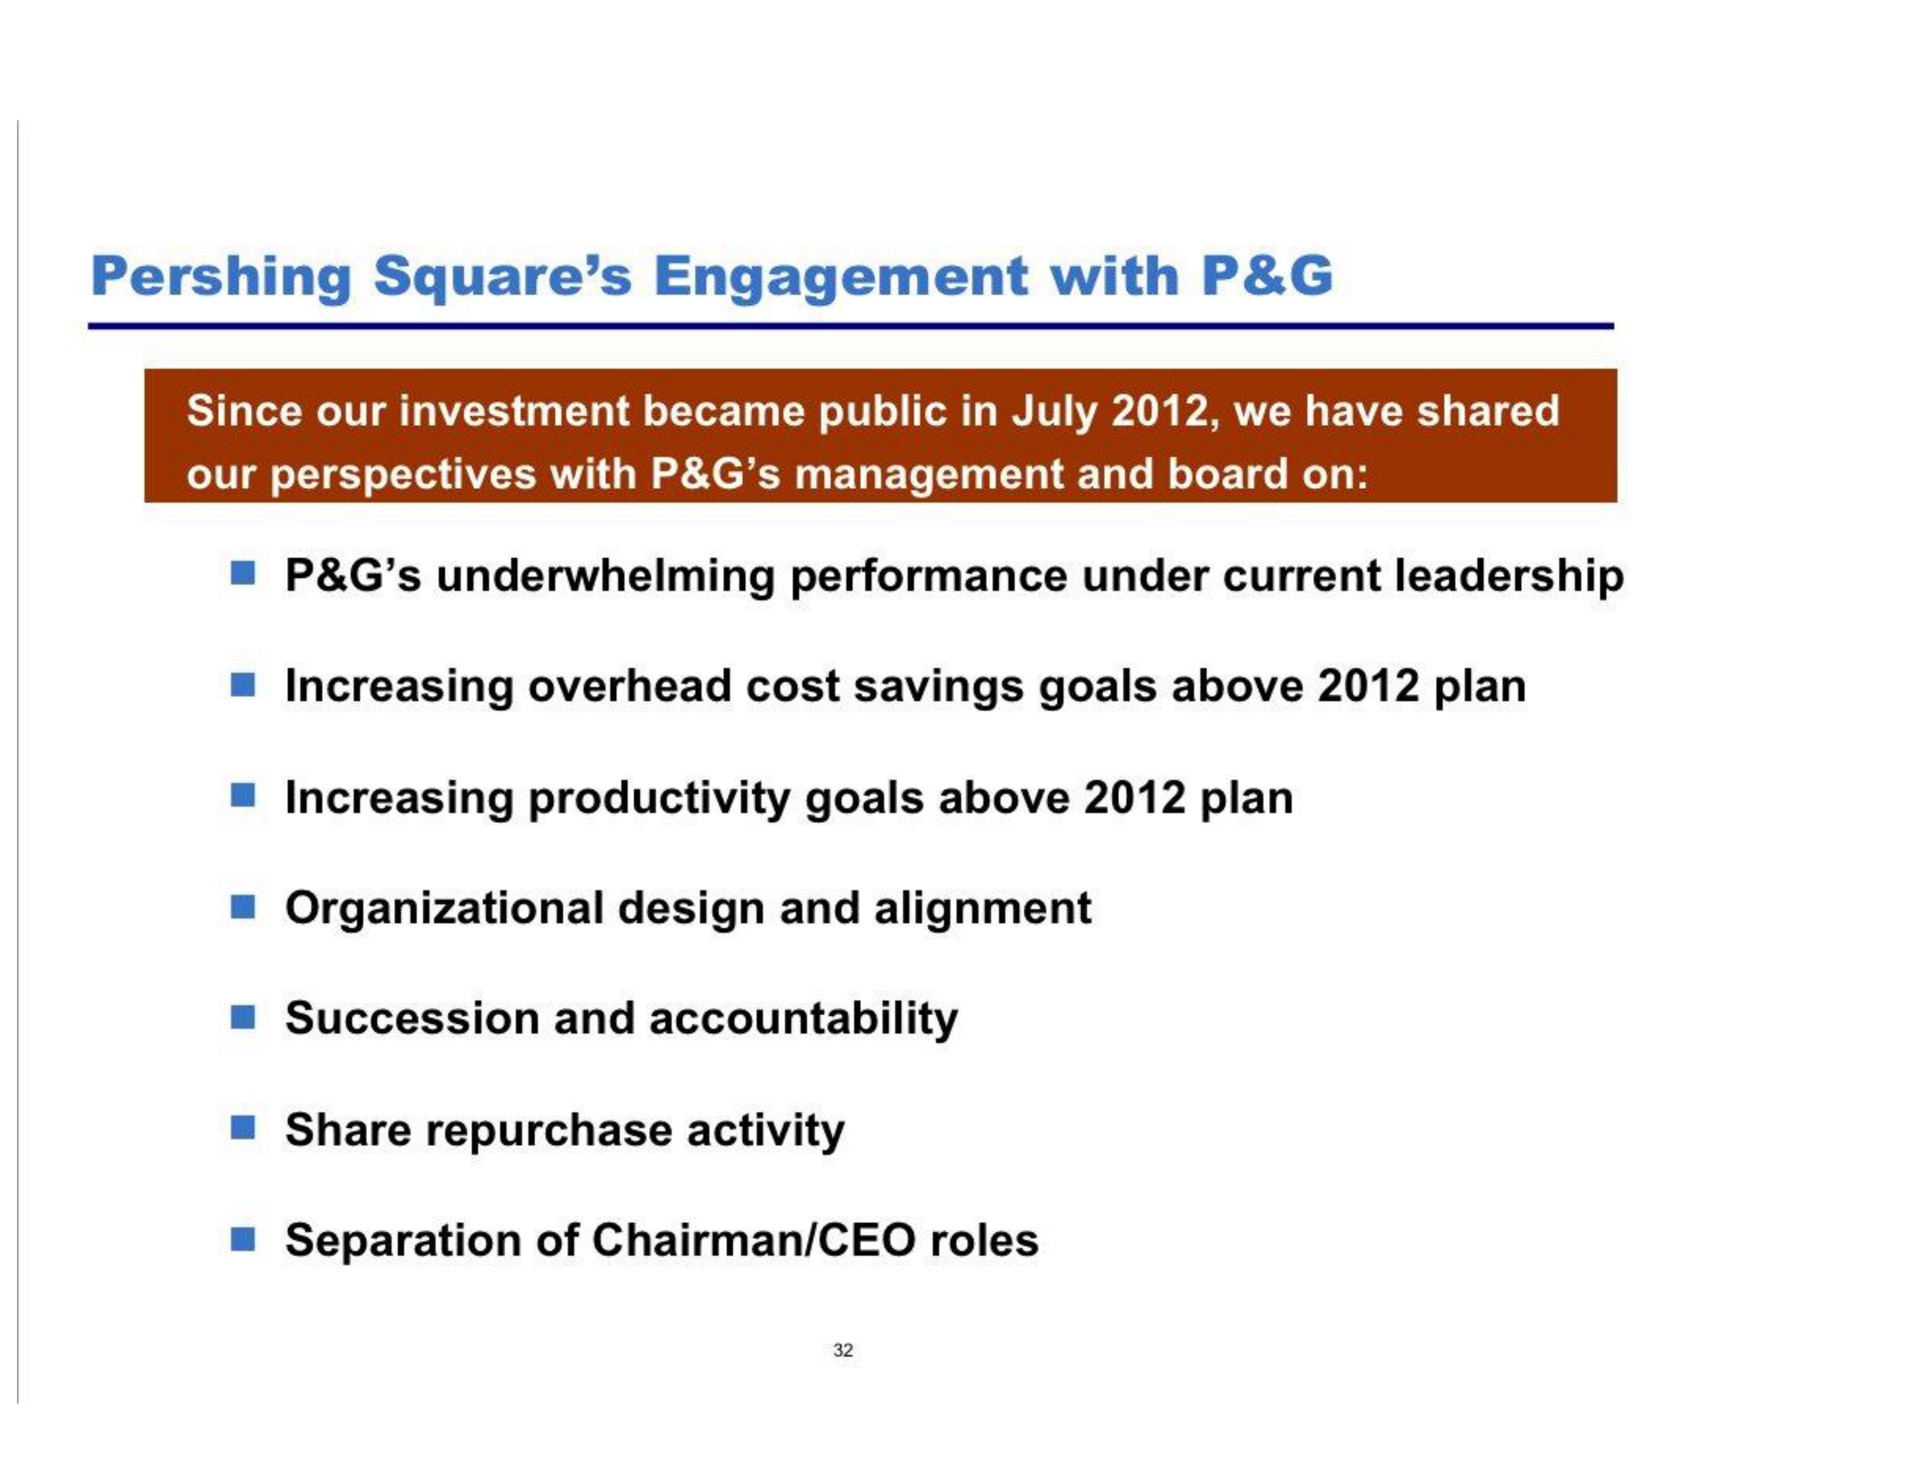 square engagement with performance under current leadership increasing overhead cost savings goals above plan increasing productivity goals above plan organizational design and alignment succession and accountability share repurchase activity separation of chairman roles | Pershing Square